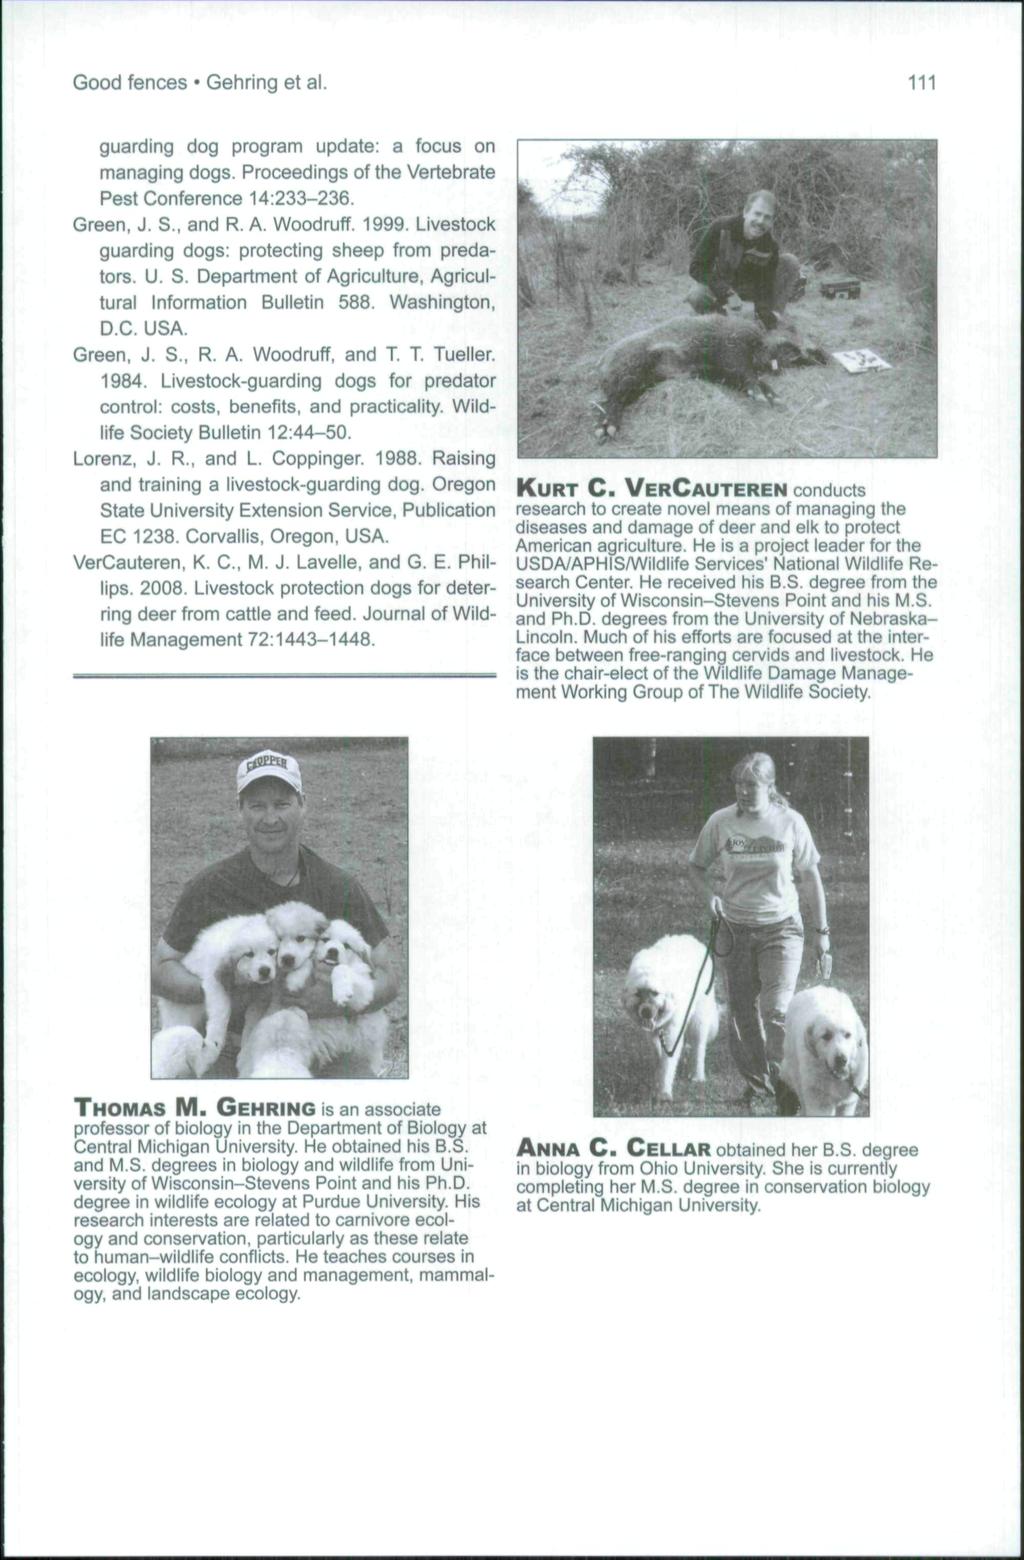 Good fences Gehring et al. 111 guarding dog program update: a focus on managing dogs. Proceedings of the Vertebrate Pest Conference 14:233-236. Green, J. S., and R. A. Woodruff. 1999.